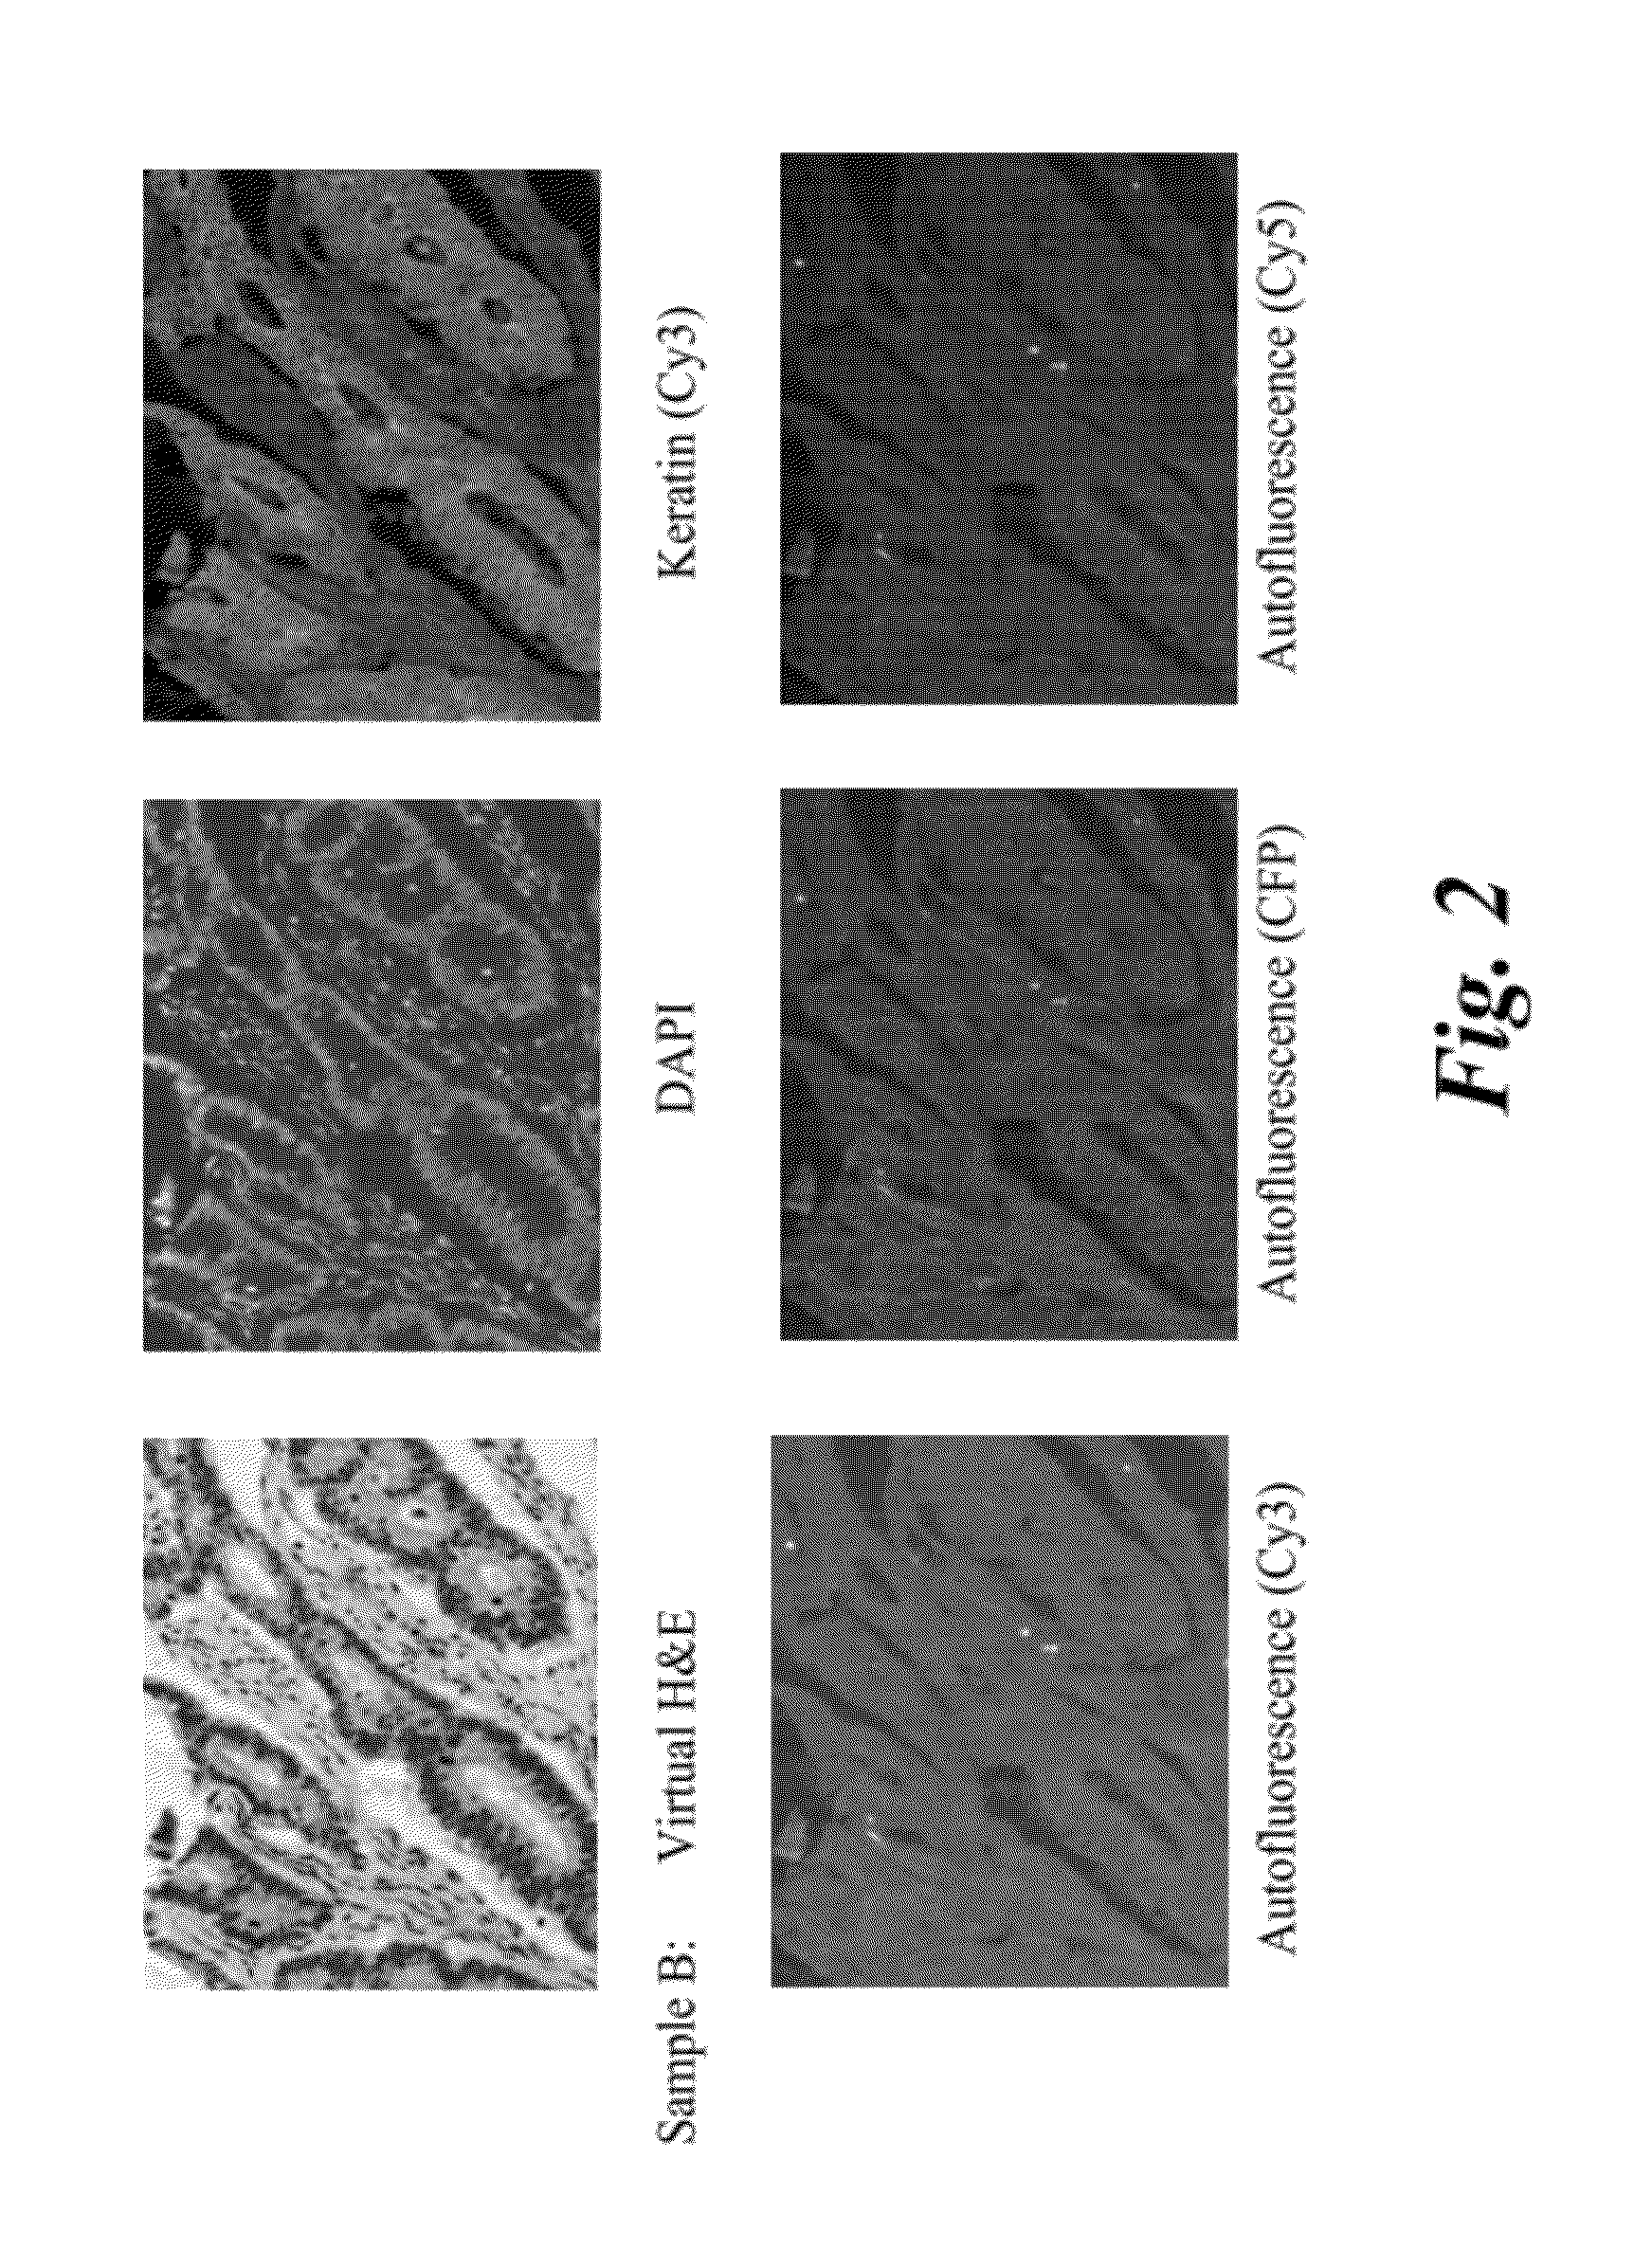 System and methods for mapping fluorescent images into a bright field color space